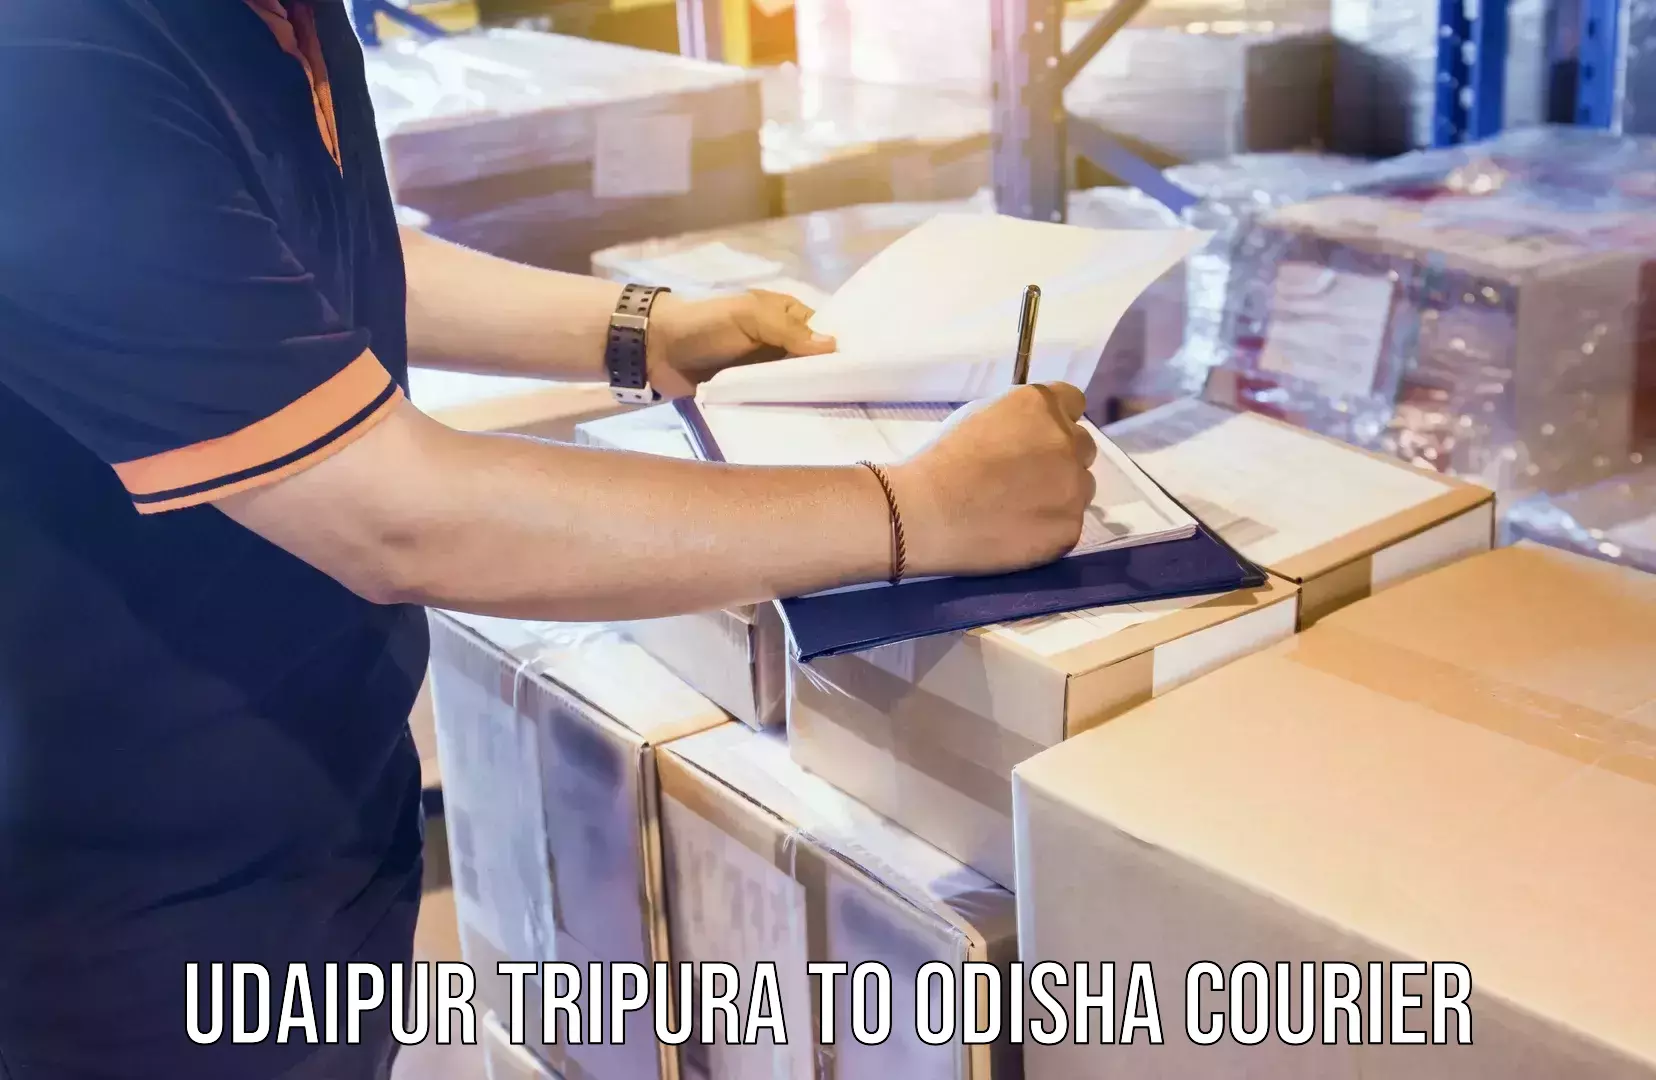 Efficient courier operations Udaipur Tripura to Odisha